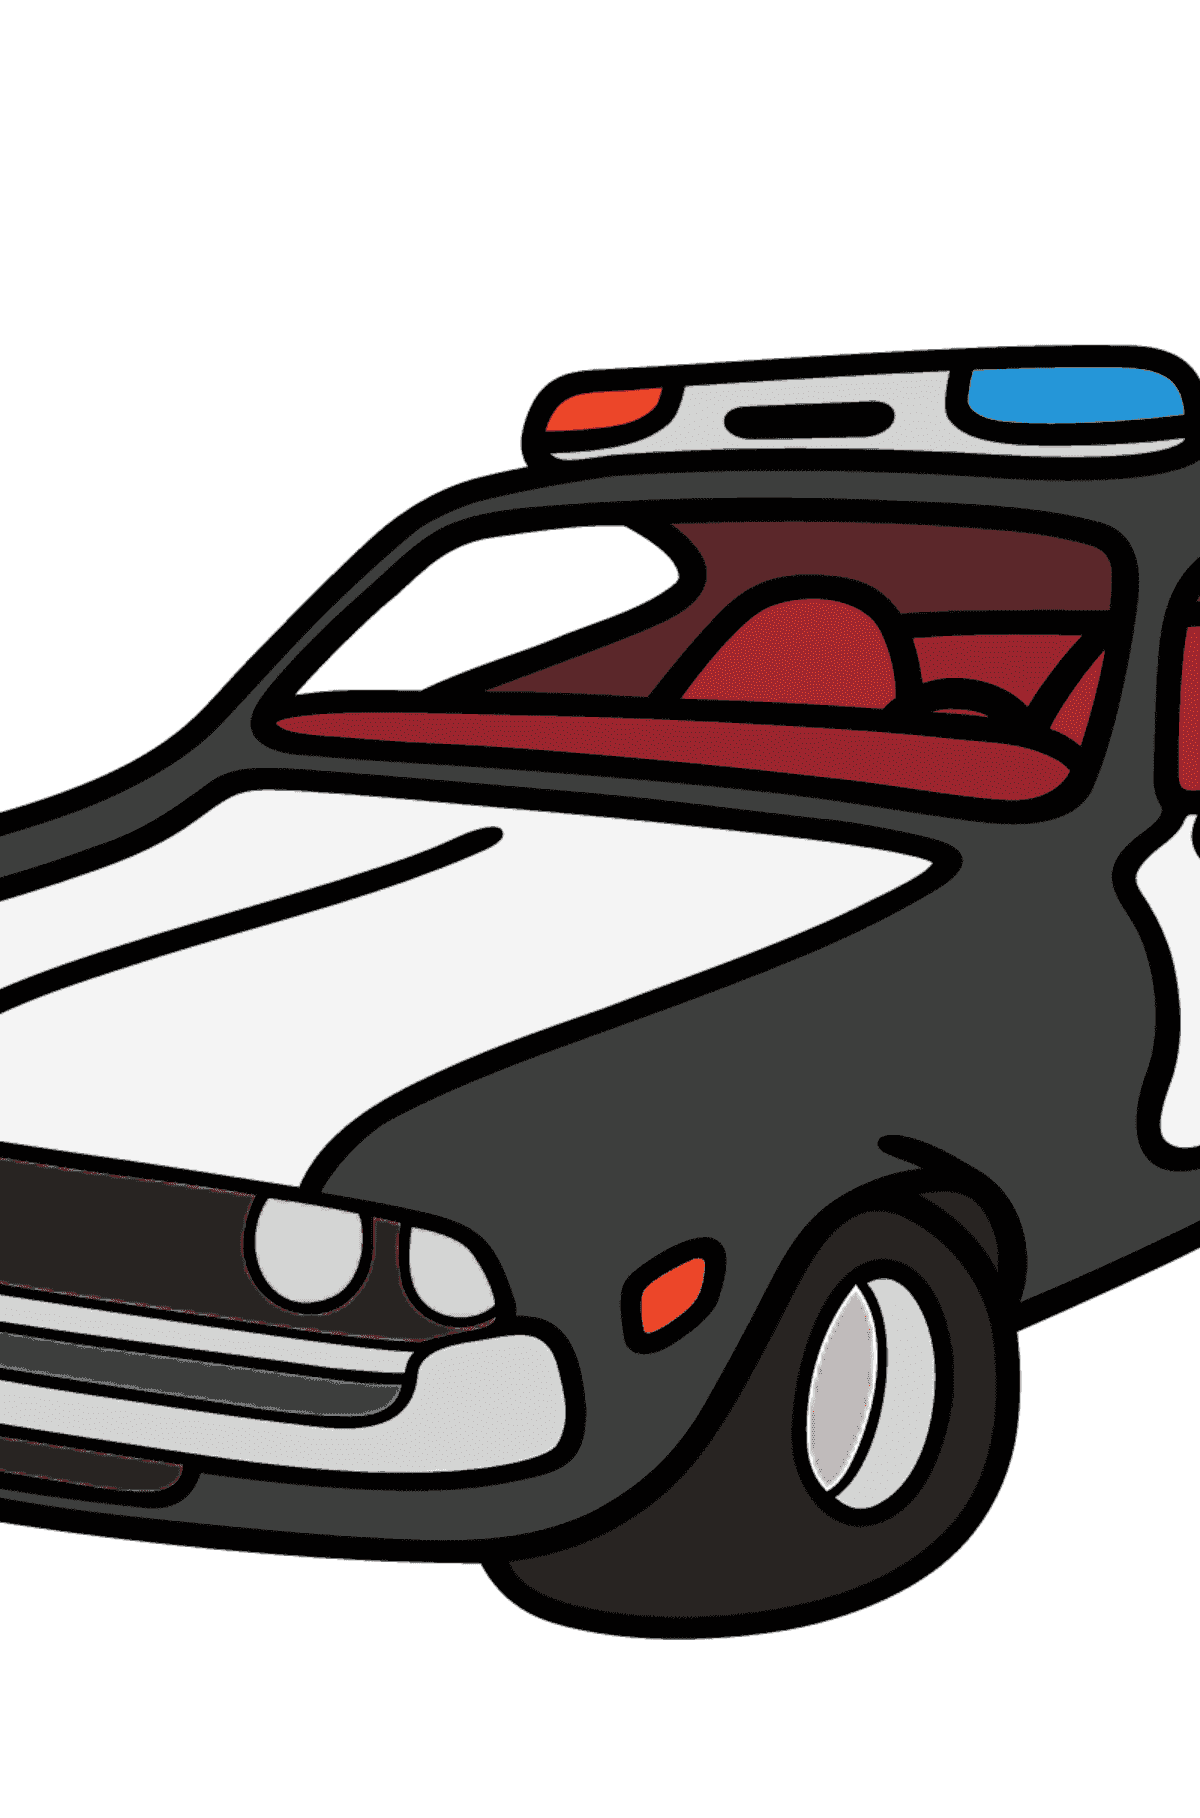 Coloring Page - A Dark Gray Police Car for Children  - Color by Number Addition